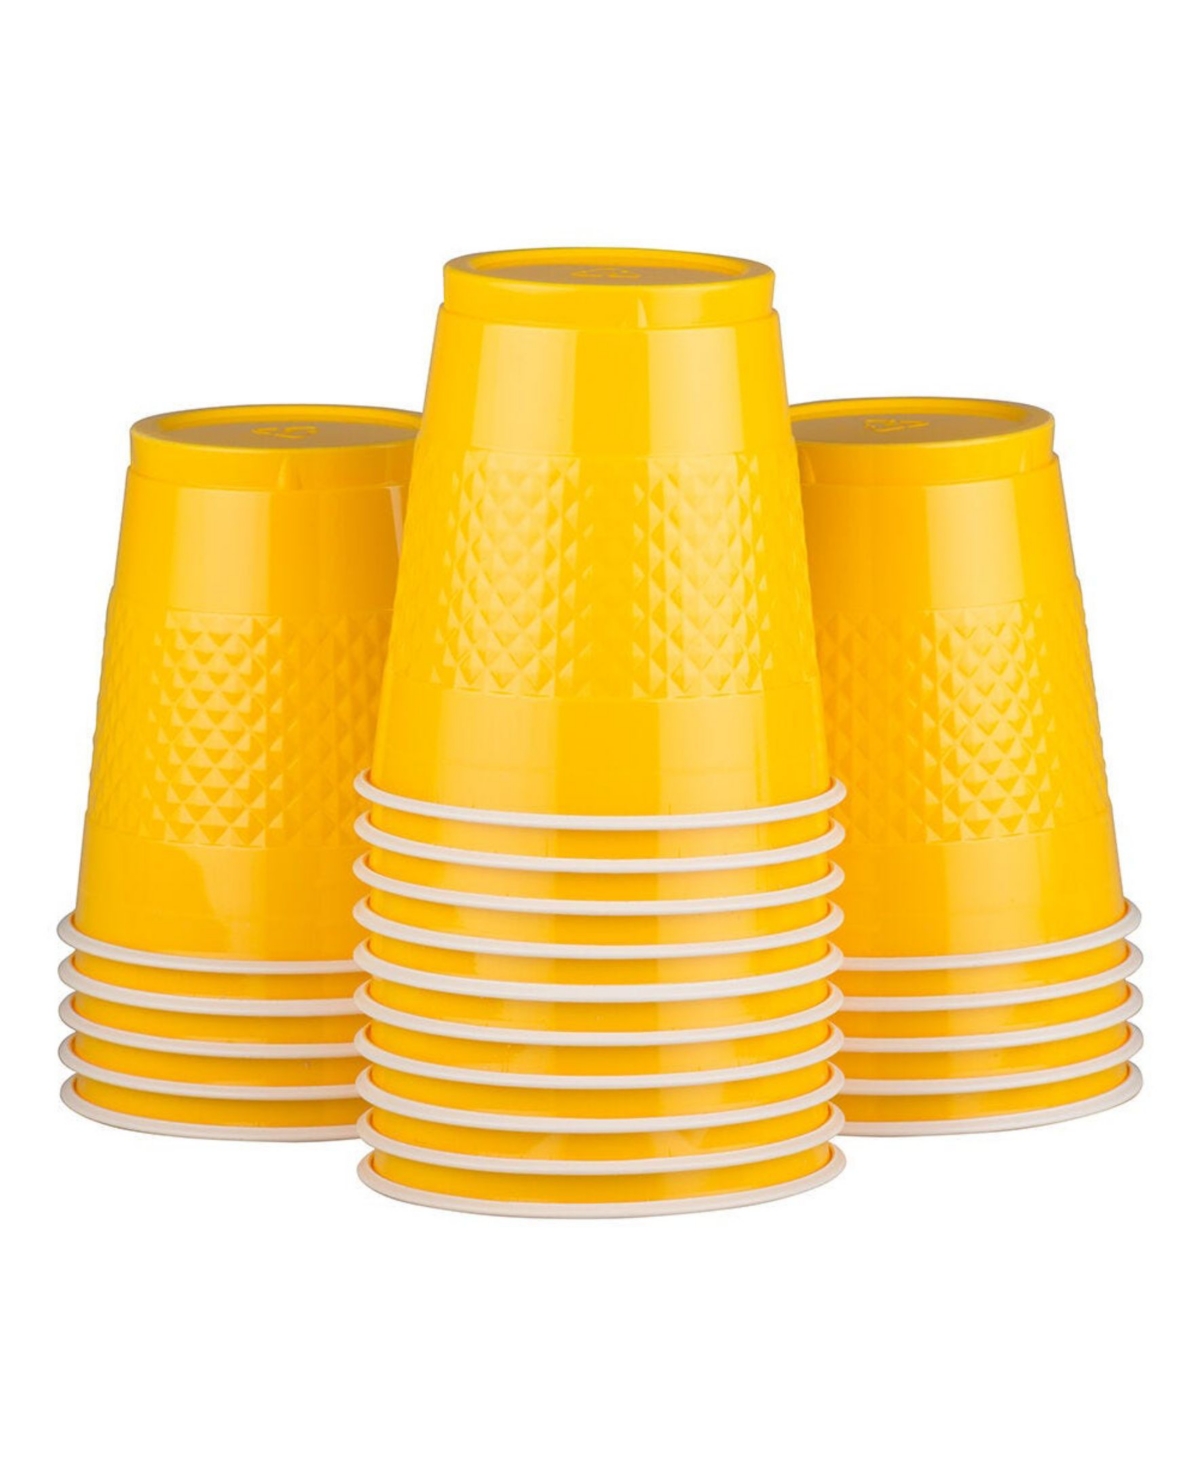 Plastic Party Cups - 12 Ounces - 20 Glasses Per Pack - Yellow